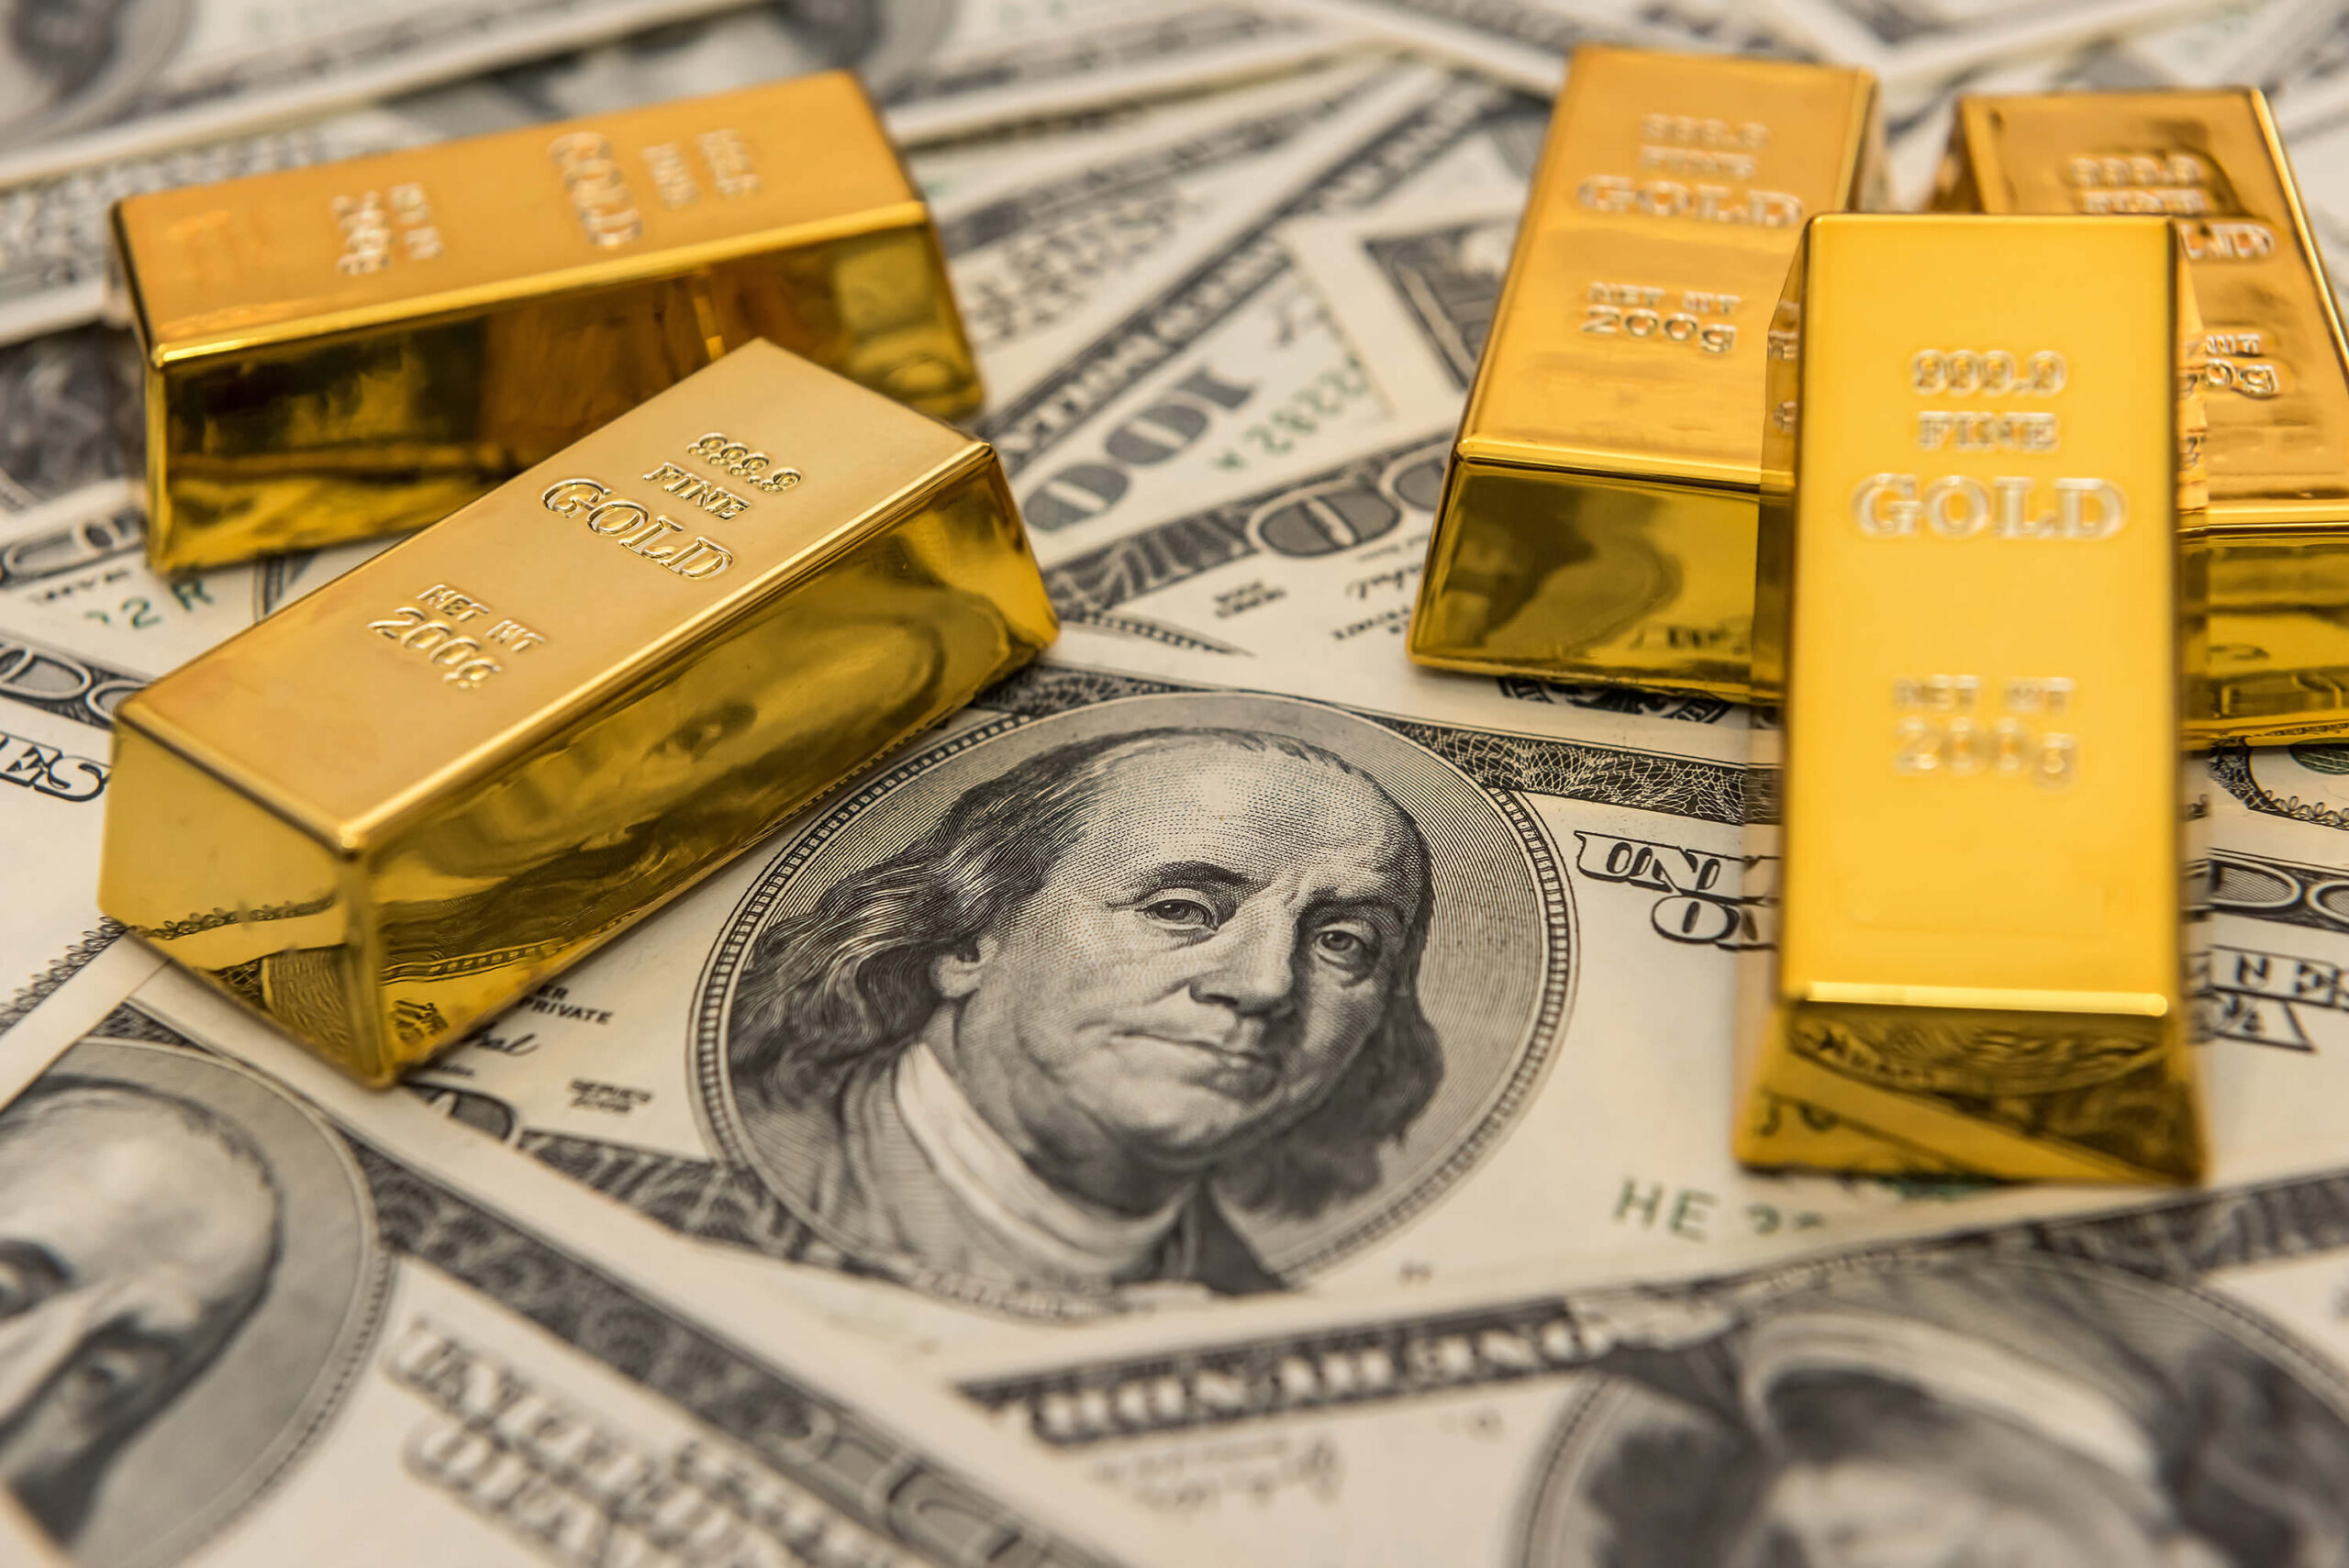 metal, finance, investment, dollar, currency, wealth, gold, bullion, business, savings, rich, banking, market, background, financial, money, bar, banknote, bank, gold bar, usd, exchange, 100, reserve, golden, economy, asset, success, safe, concept, cash, precious, ingot, note, value, luxury, stack, price, benjamin franklin, bill, inflation, standard, white, pure, treasure, fortune, trade, america, peg, demand